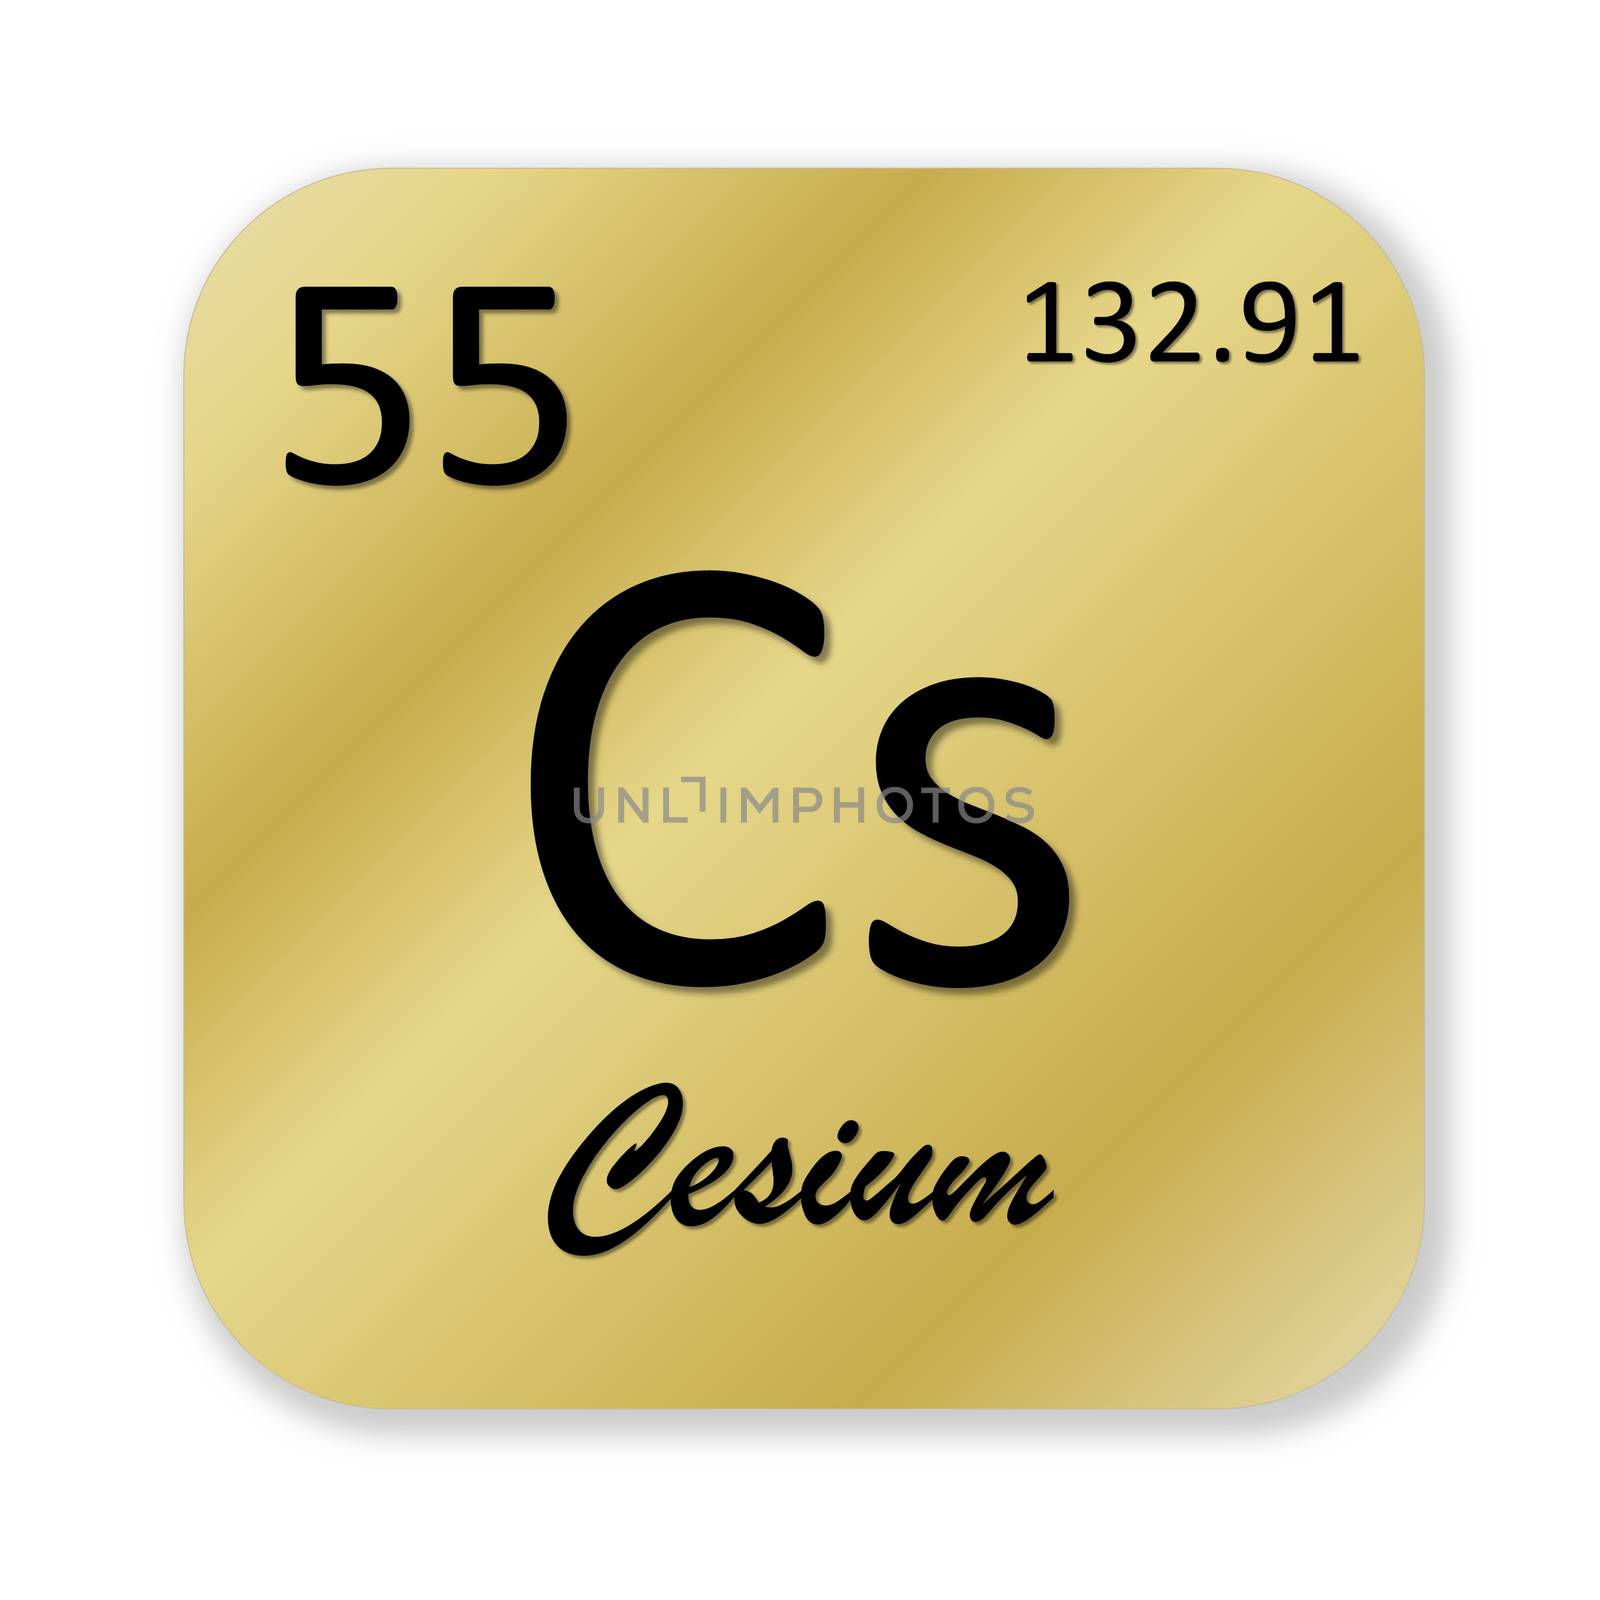 Black cesium element into golden square shape isolated in white background